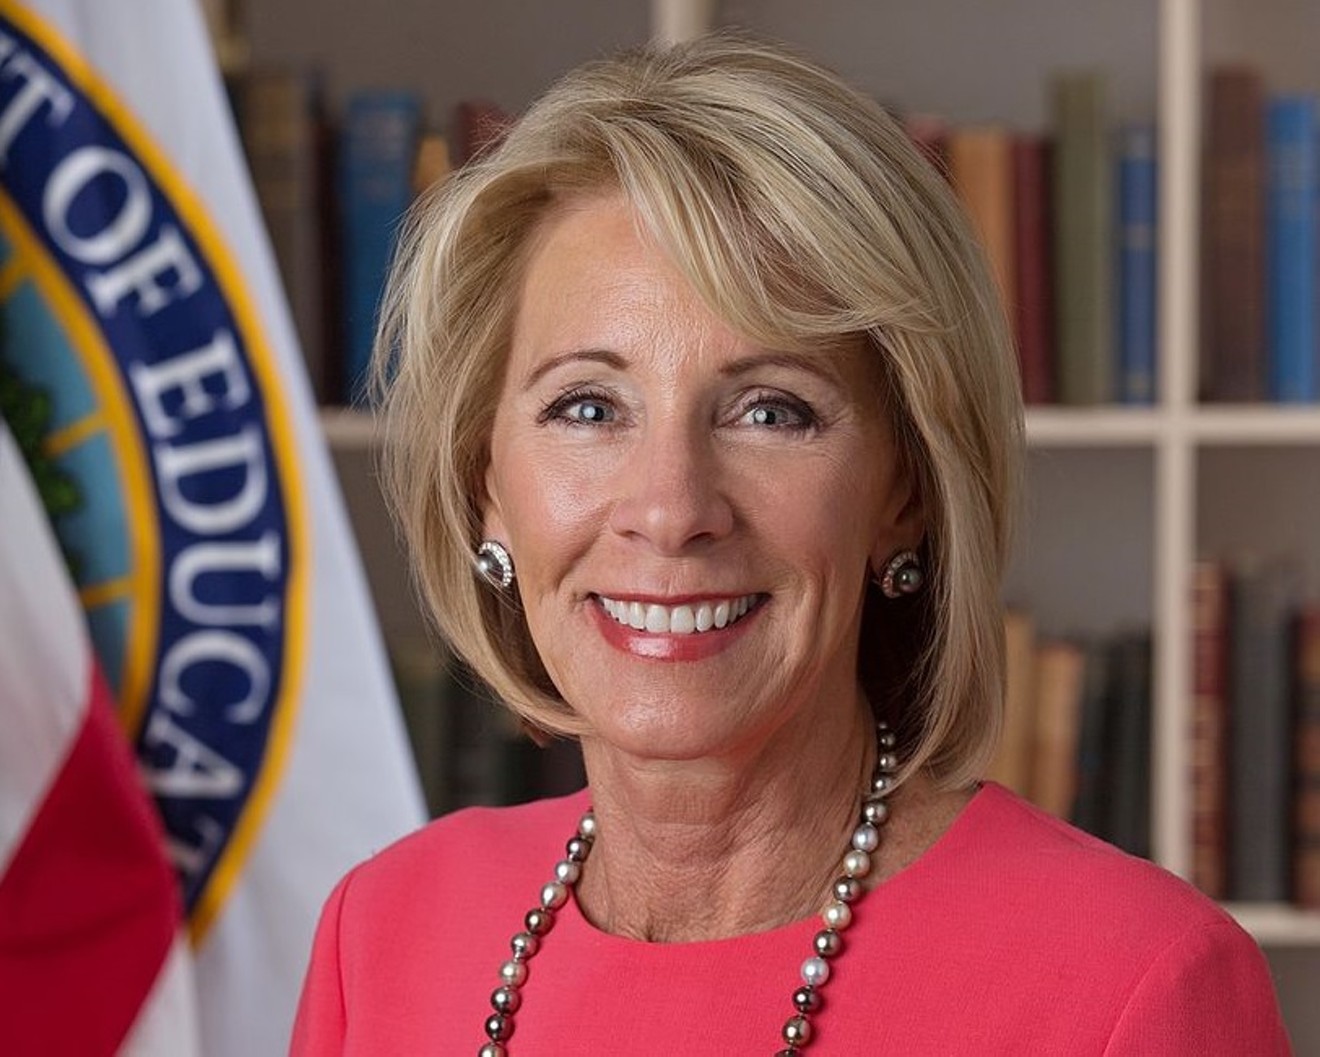 Trump's education secretary, Betsy DeVos, stumped The New York Times last week by appointing Democrats and minorities to her staff.